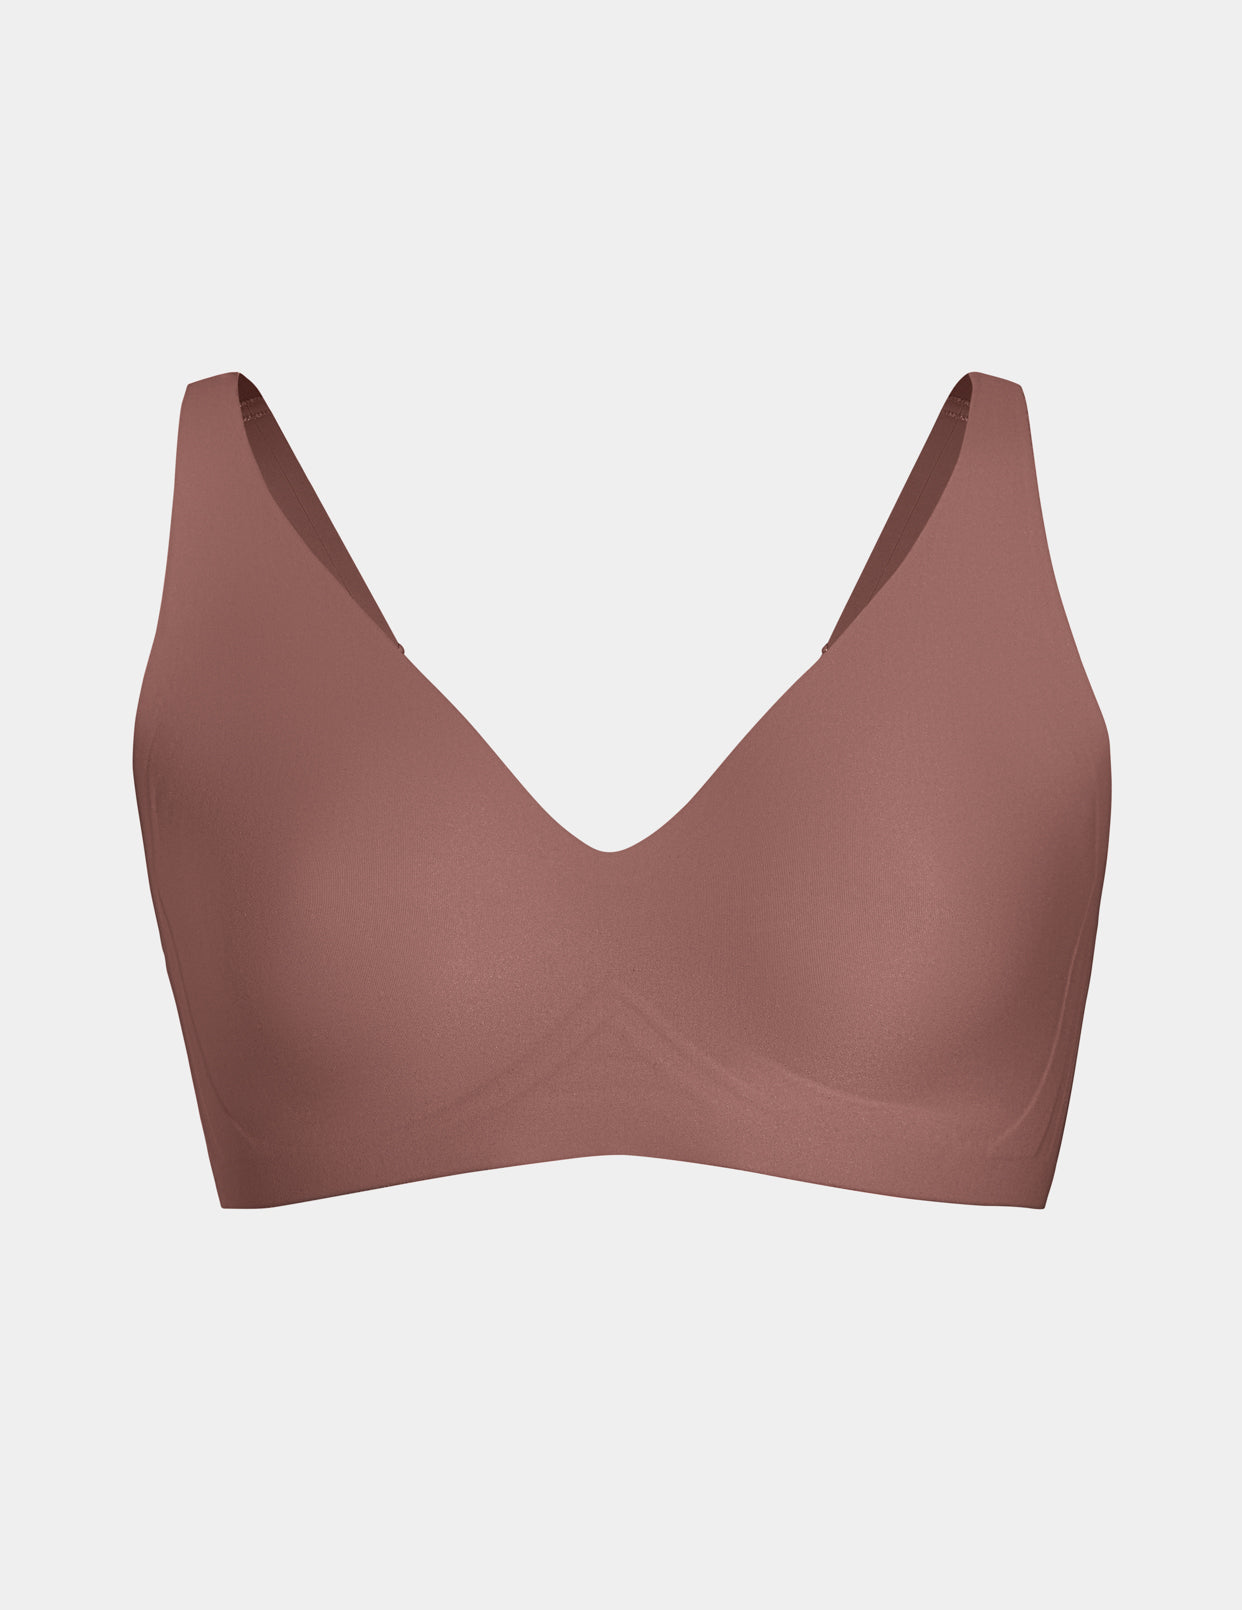 Knix Revolution wireless bra try-on and review! And we MUST talk